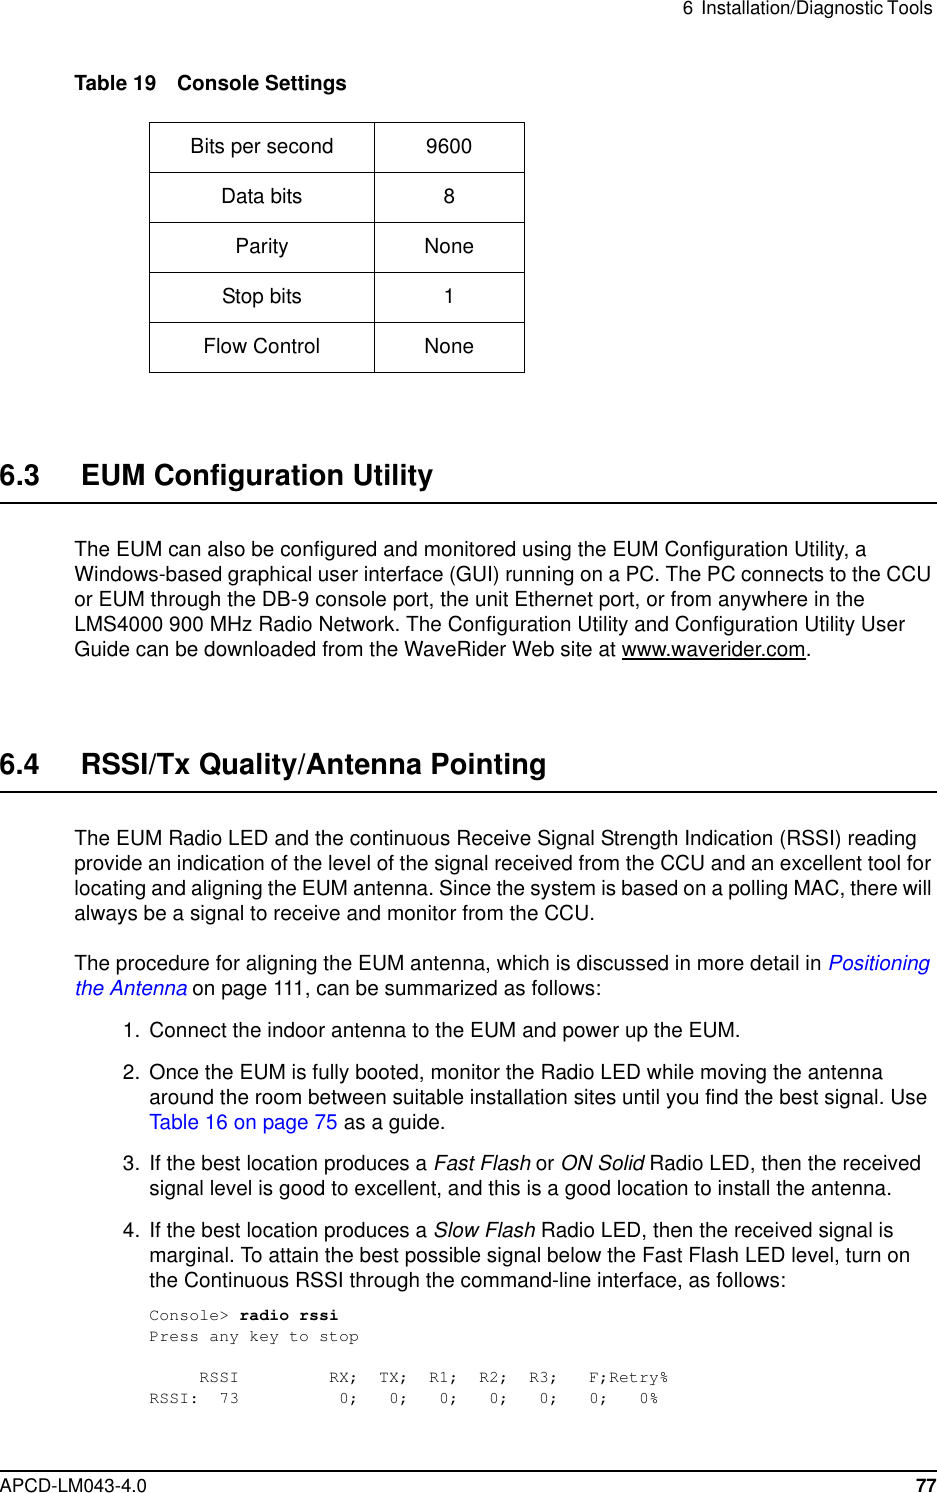 6 Installation/Diagnostic ToolsAPCD-LM043-4.0 77Table 19 Console Settings6.3 EUM Configuration UtilityThe EUM can also be configured and monitored using the EUM Configuration Utility, aWindows-based graphical user interface (GUI) running on a PC. The PC connects to the CCUor EUM through the DB-9 console port, the unit Ethernet port, or from anywhere in theLMS4000 900 MHz Radio Network. The Configuration Utility and Configuration Utility UserGuide can be downloaded from the WaveRider Web site at www.waverider.com.6.4 RSSI/Tx Quality/Antenna PointingThe EUM Radio LED and the continuous Receive Signal Strength Indication (RSSI) readingprovide an indication of the level of the signal received from the CCU and an excellent tool forlocating and aligning the EUM antenna. Since the system is based on a polling MAC, there willalways be a signal to receive and monitor from the CCU.The procedure for aligning the EUM antenna, which is discussed in more detail in Positioningthe Antenna on page 111, can be summarized as follows:1. Connect the indoor antenna to the EUM and power up the EUM.2. Once the EUM is fully booted, monitor the Radio LED while moving the antennaaround the room between suitable installation sites until you find the best signal. UseTable 16 on page 75 as a guide.3. If the best location produces a Fast Flash or ON Solid Radio LED, then the receivedsignal level is good to excellent, and this is a good location to install the antenna.4. If the best location produces a Slow Flash Radio LED, then the received signal ismarginal. To attain the best possible signal below the Fast Flash LED level, turn onthe Continuous RSSI through the command-line interface, as follows:Console&gt; radio rssiPress any key to stopRSSI RX; TX; R1; R2; R3; F;Retry%RSSI: 73 0; 0; 0; 0; 0; 0; 0%Bits per second 9600Data bits 8Parity NoneStop bits 1Flow Control None